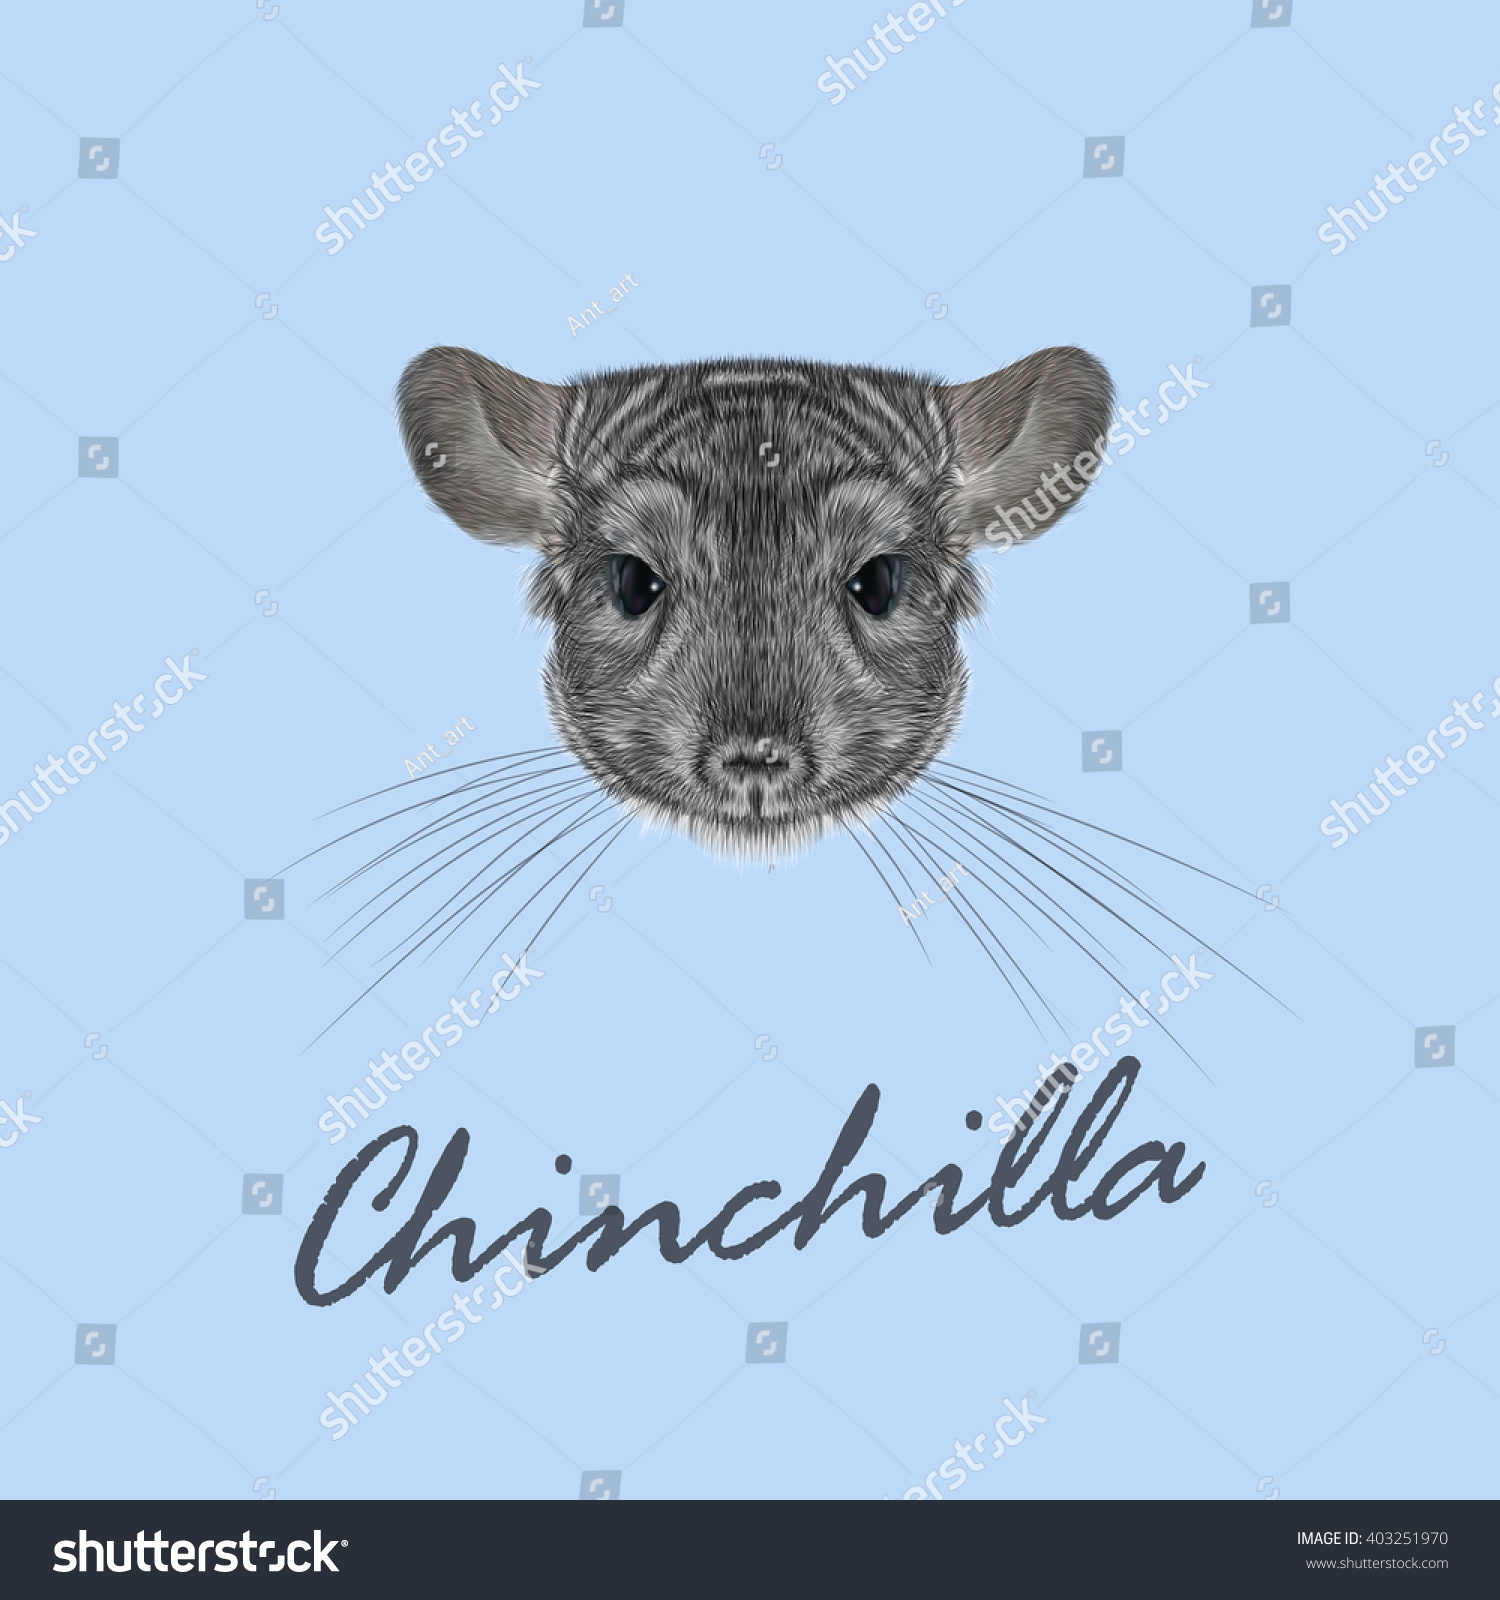 SVG of Vector Illustrated portrait of Chinchilla.Cute fluffy face of Chinchilla on blue background. svg